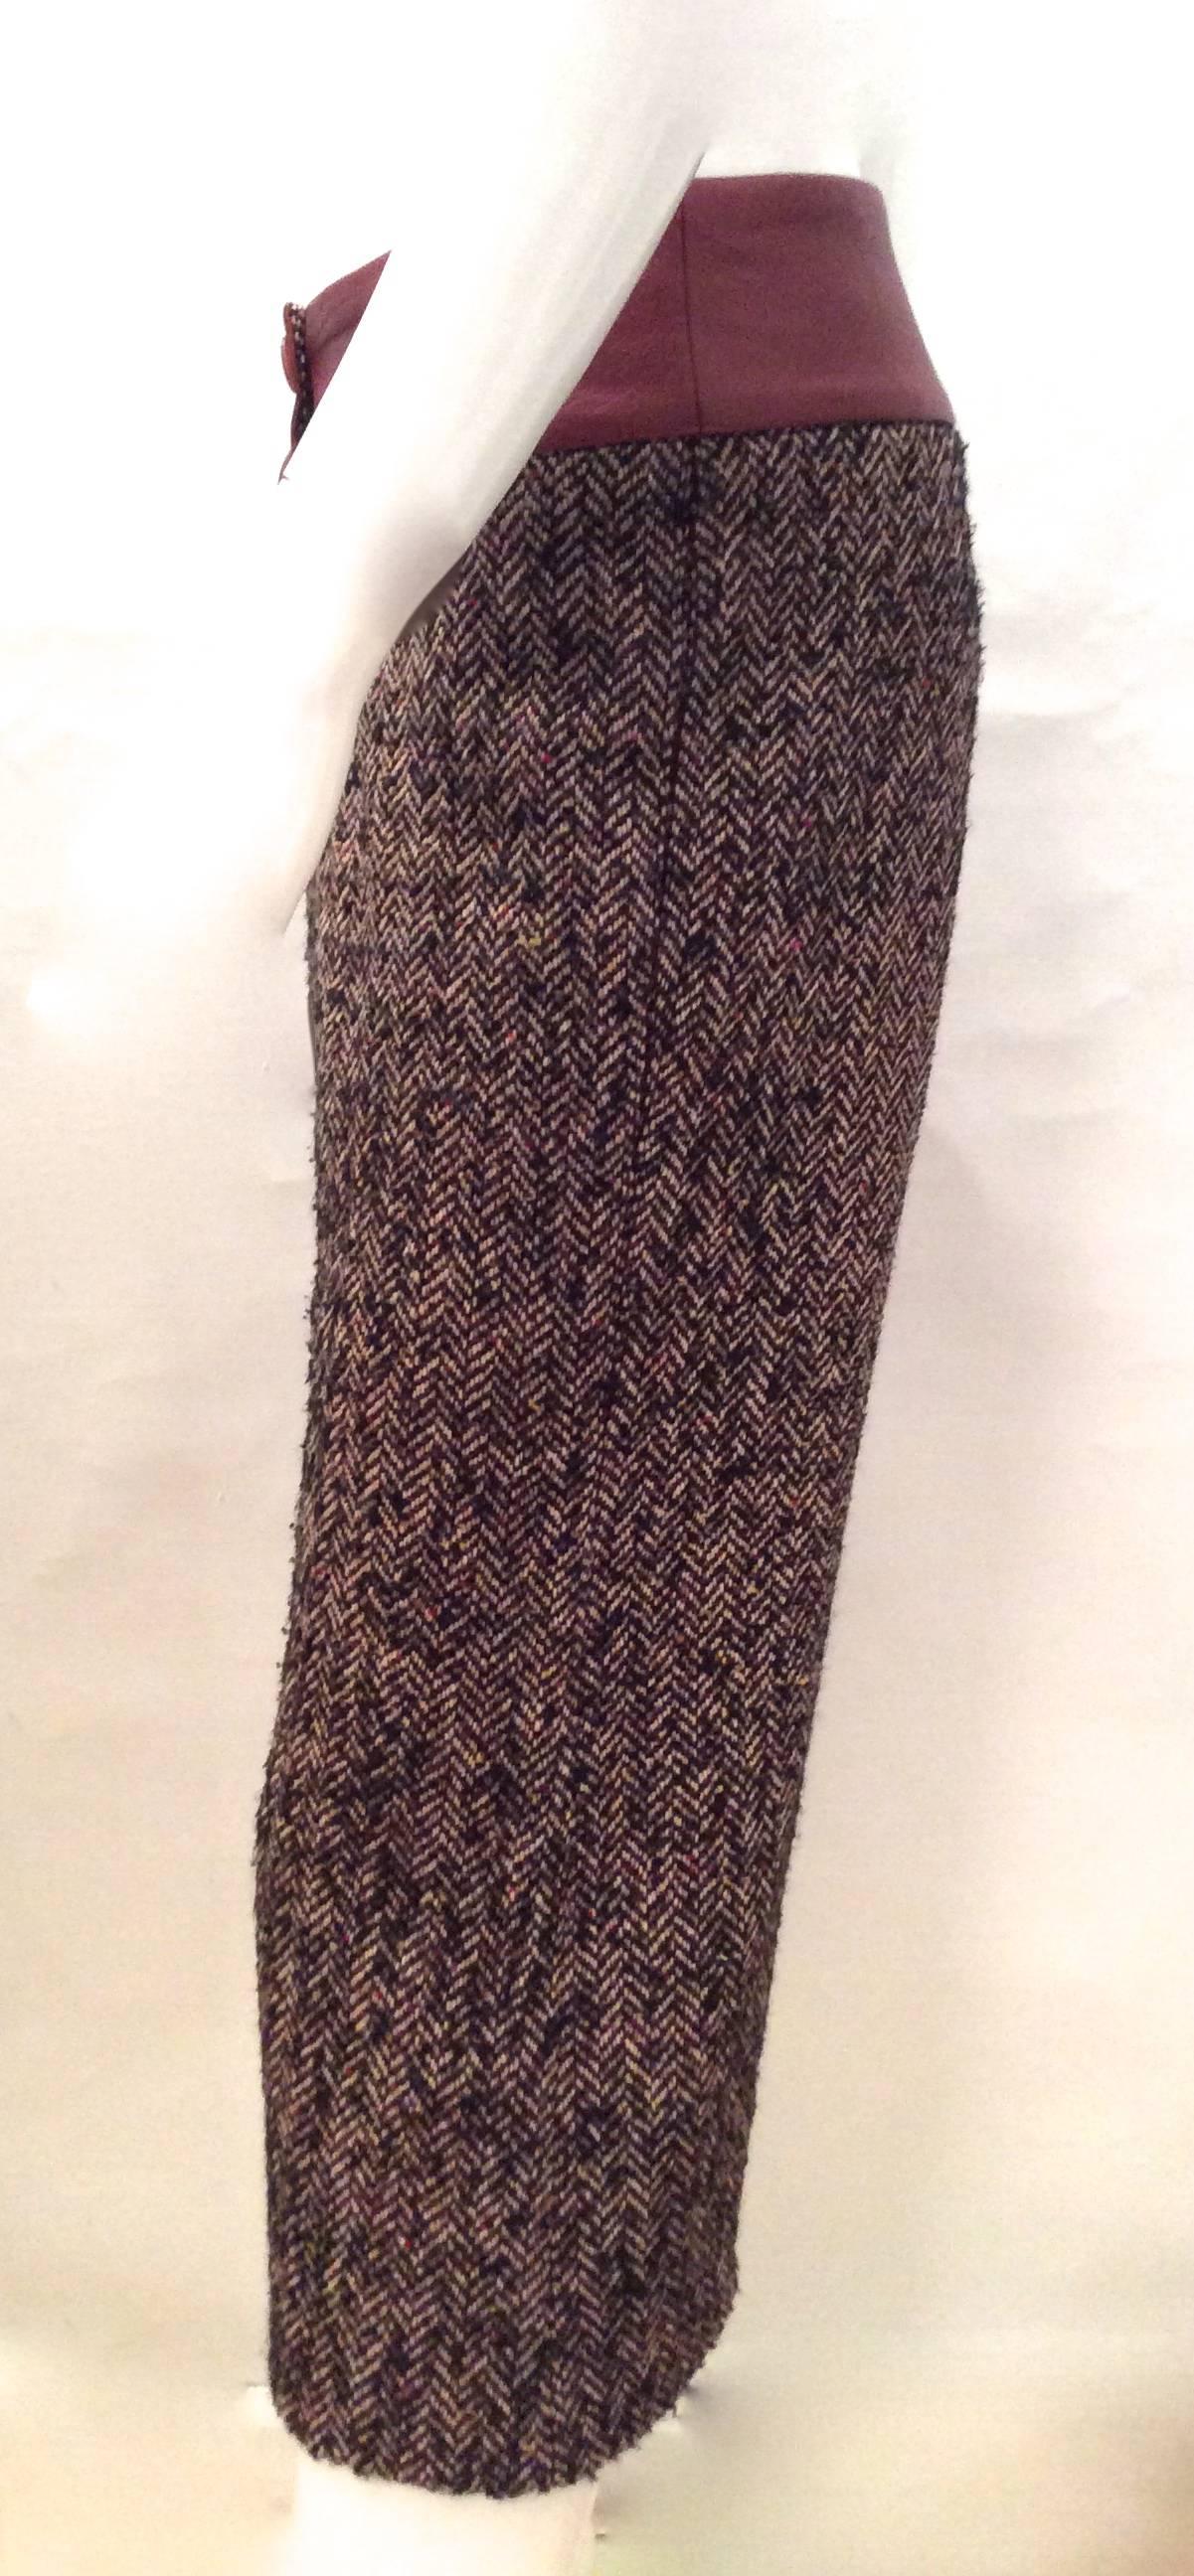 Gaucho Pants - Leather, Acrylic, Wool Blend - 1970's In Excellent Condition For Sale In Boca Raton, FL